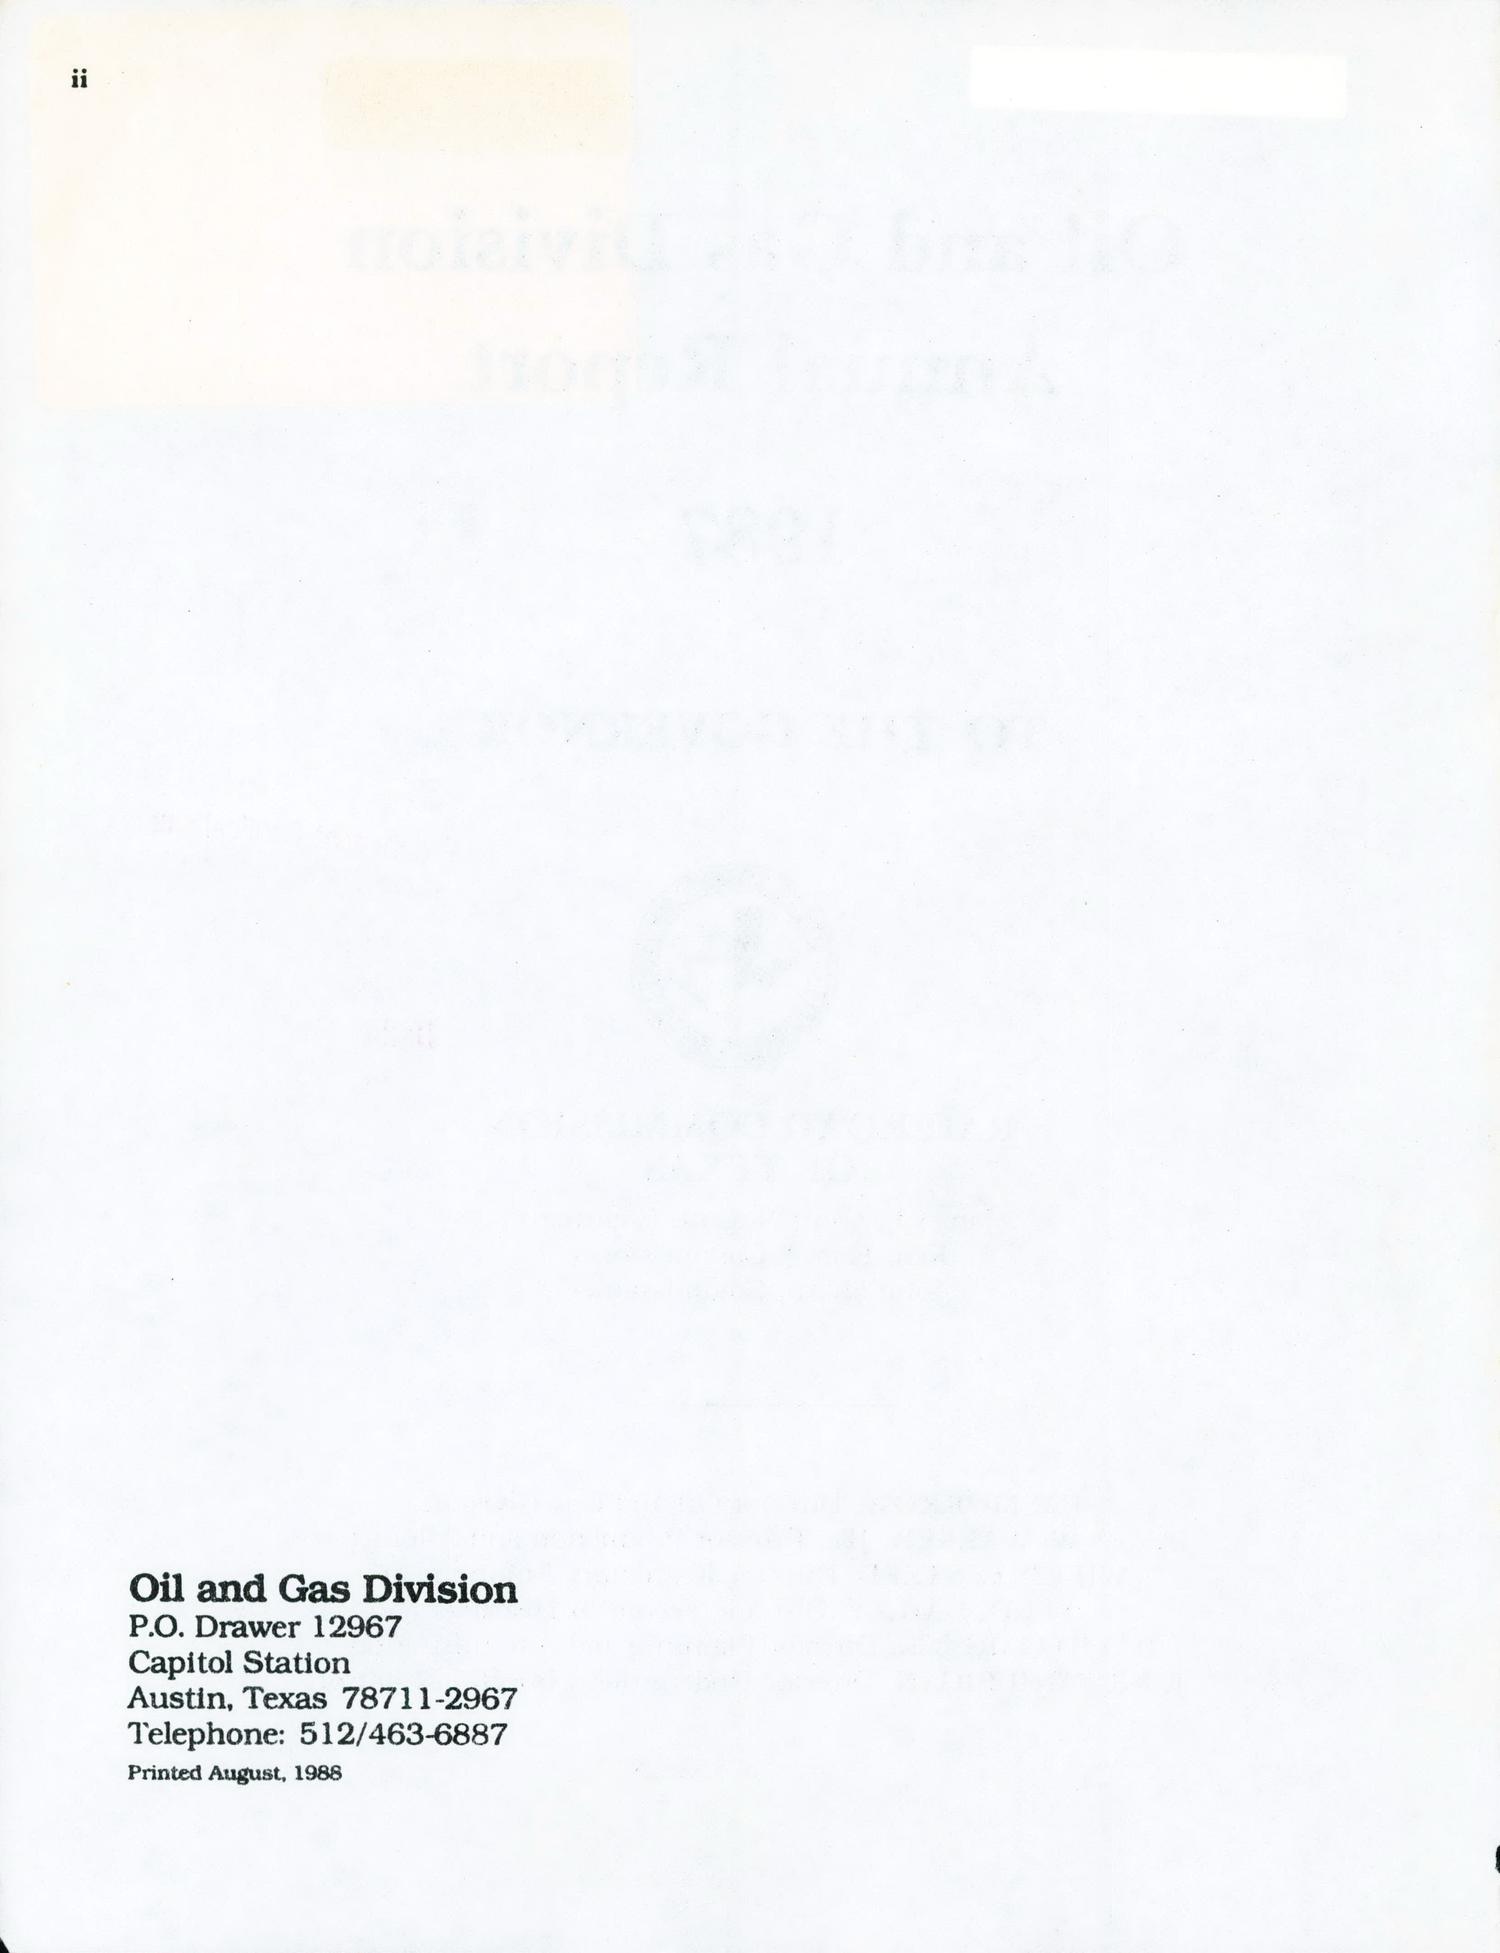 Railroad Commission of Texas Oil and Gas Division Annual Report: 1987
                                                
                                                    II
                                                